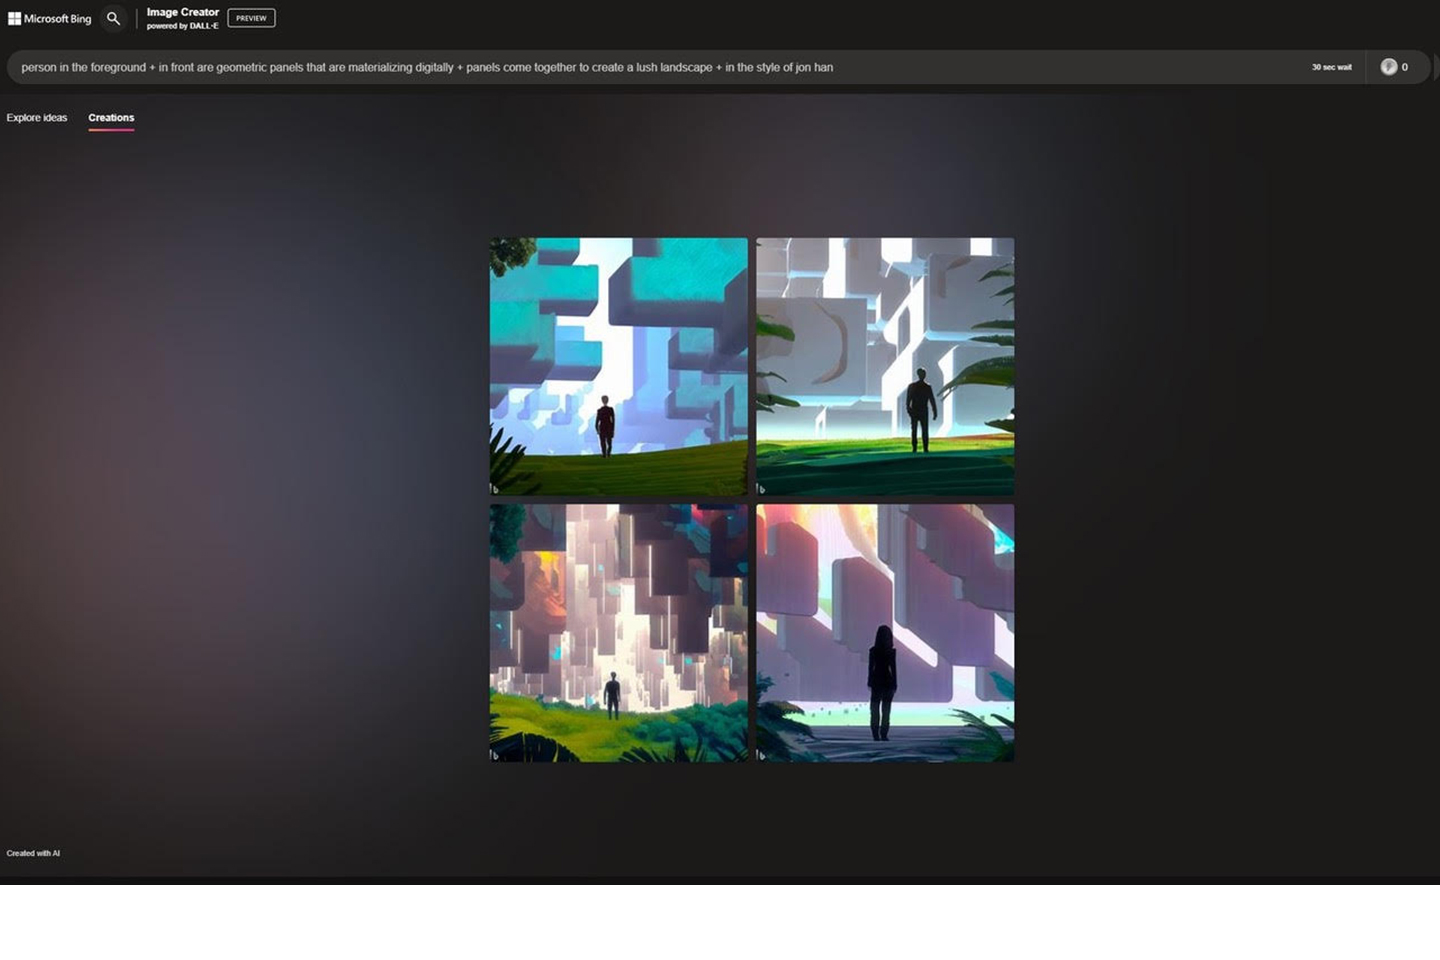 Screenshot of Bing Image Creator with the prompt 'Person in the foreground + in front are geometric panels that are materializing digitally + panels come together to create a lush landscape + in the style of jon han'